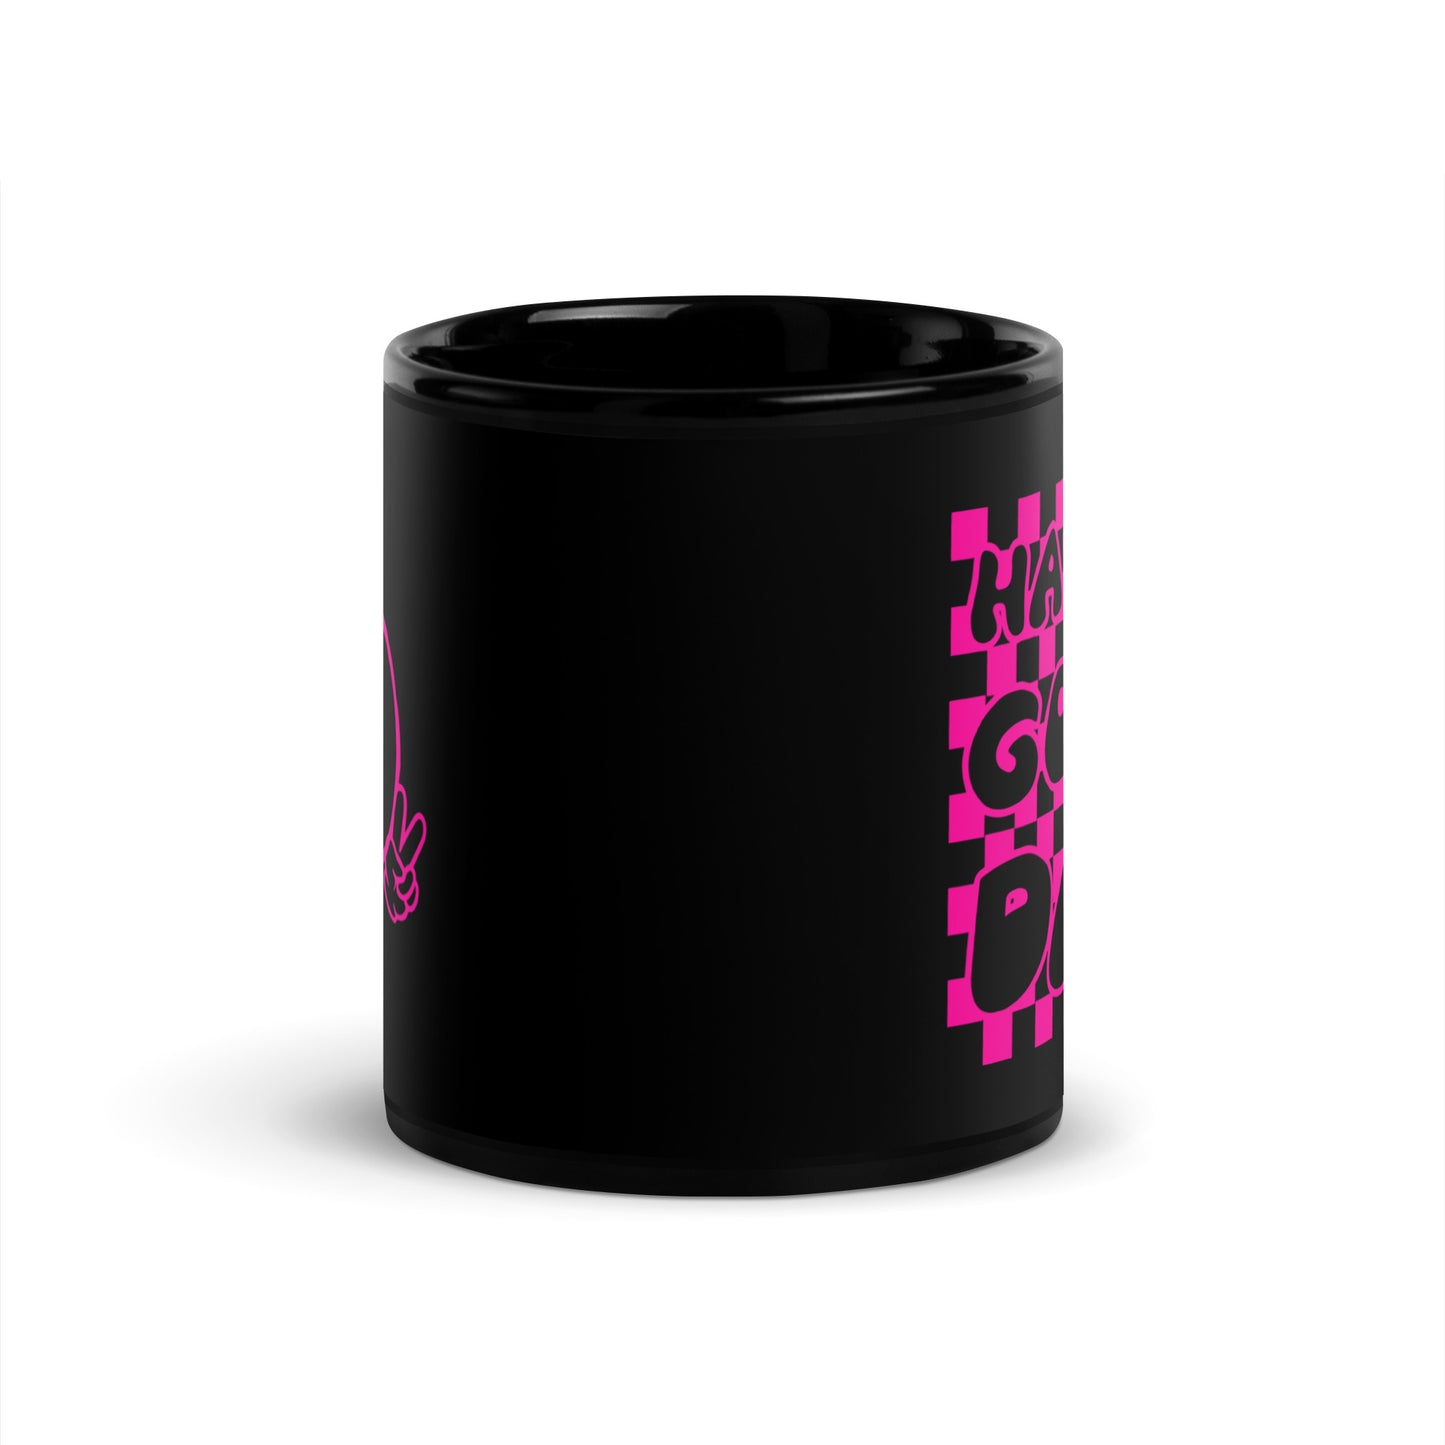 Hot Pink Smiley Face and Have A Good Day, Black Glossy Mug